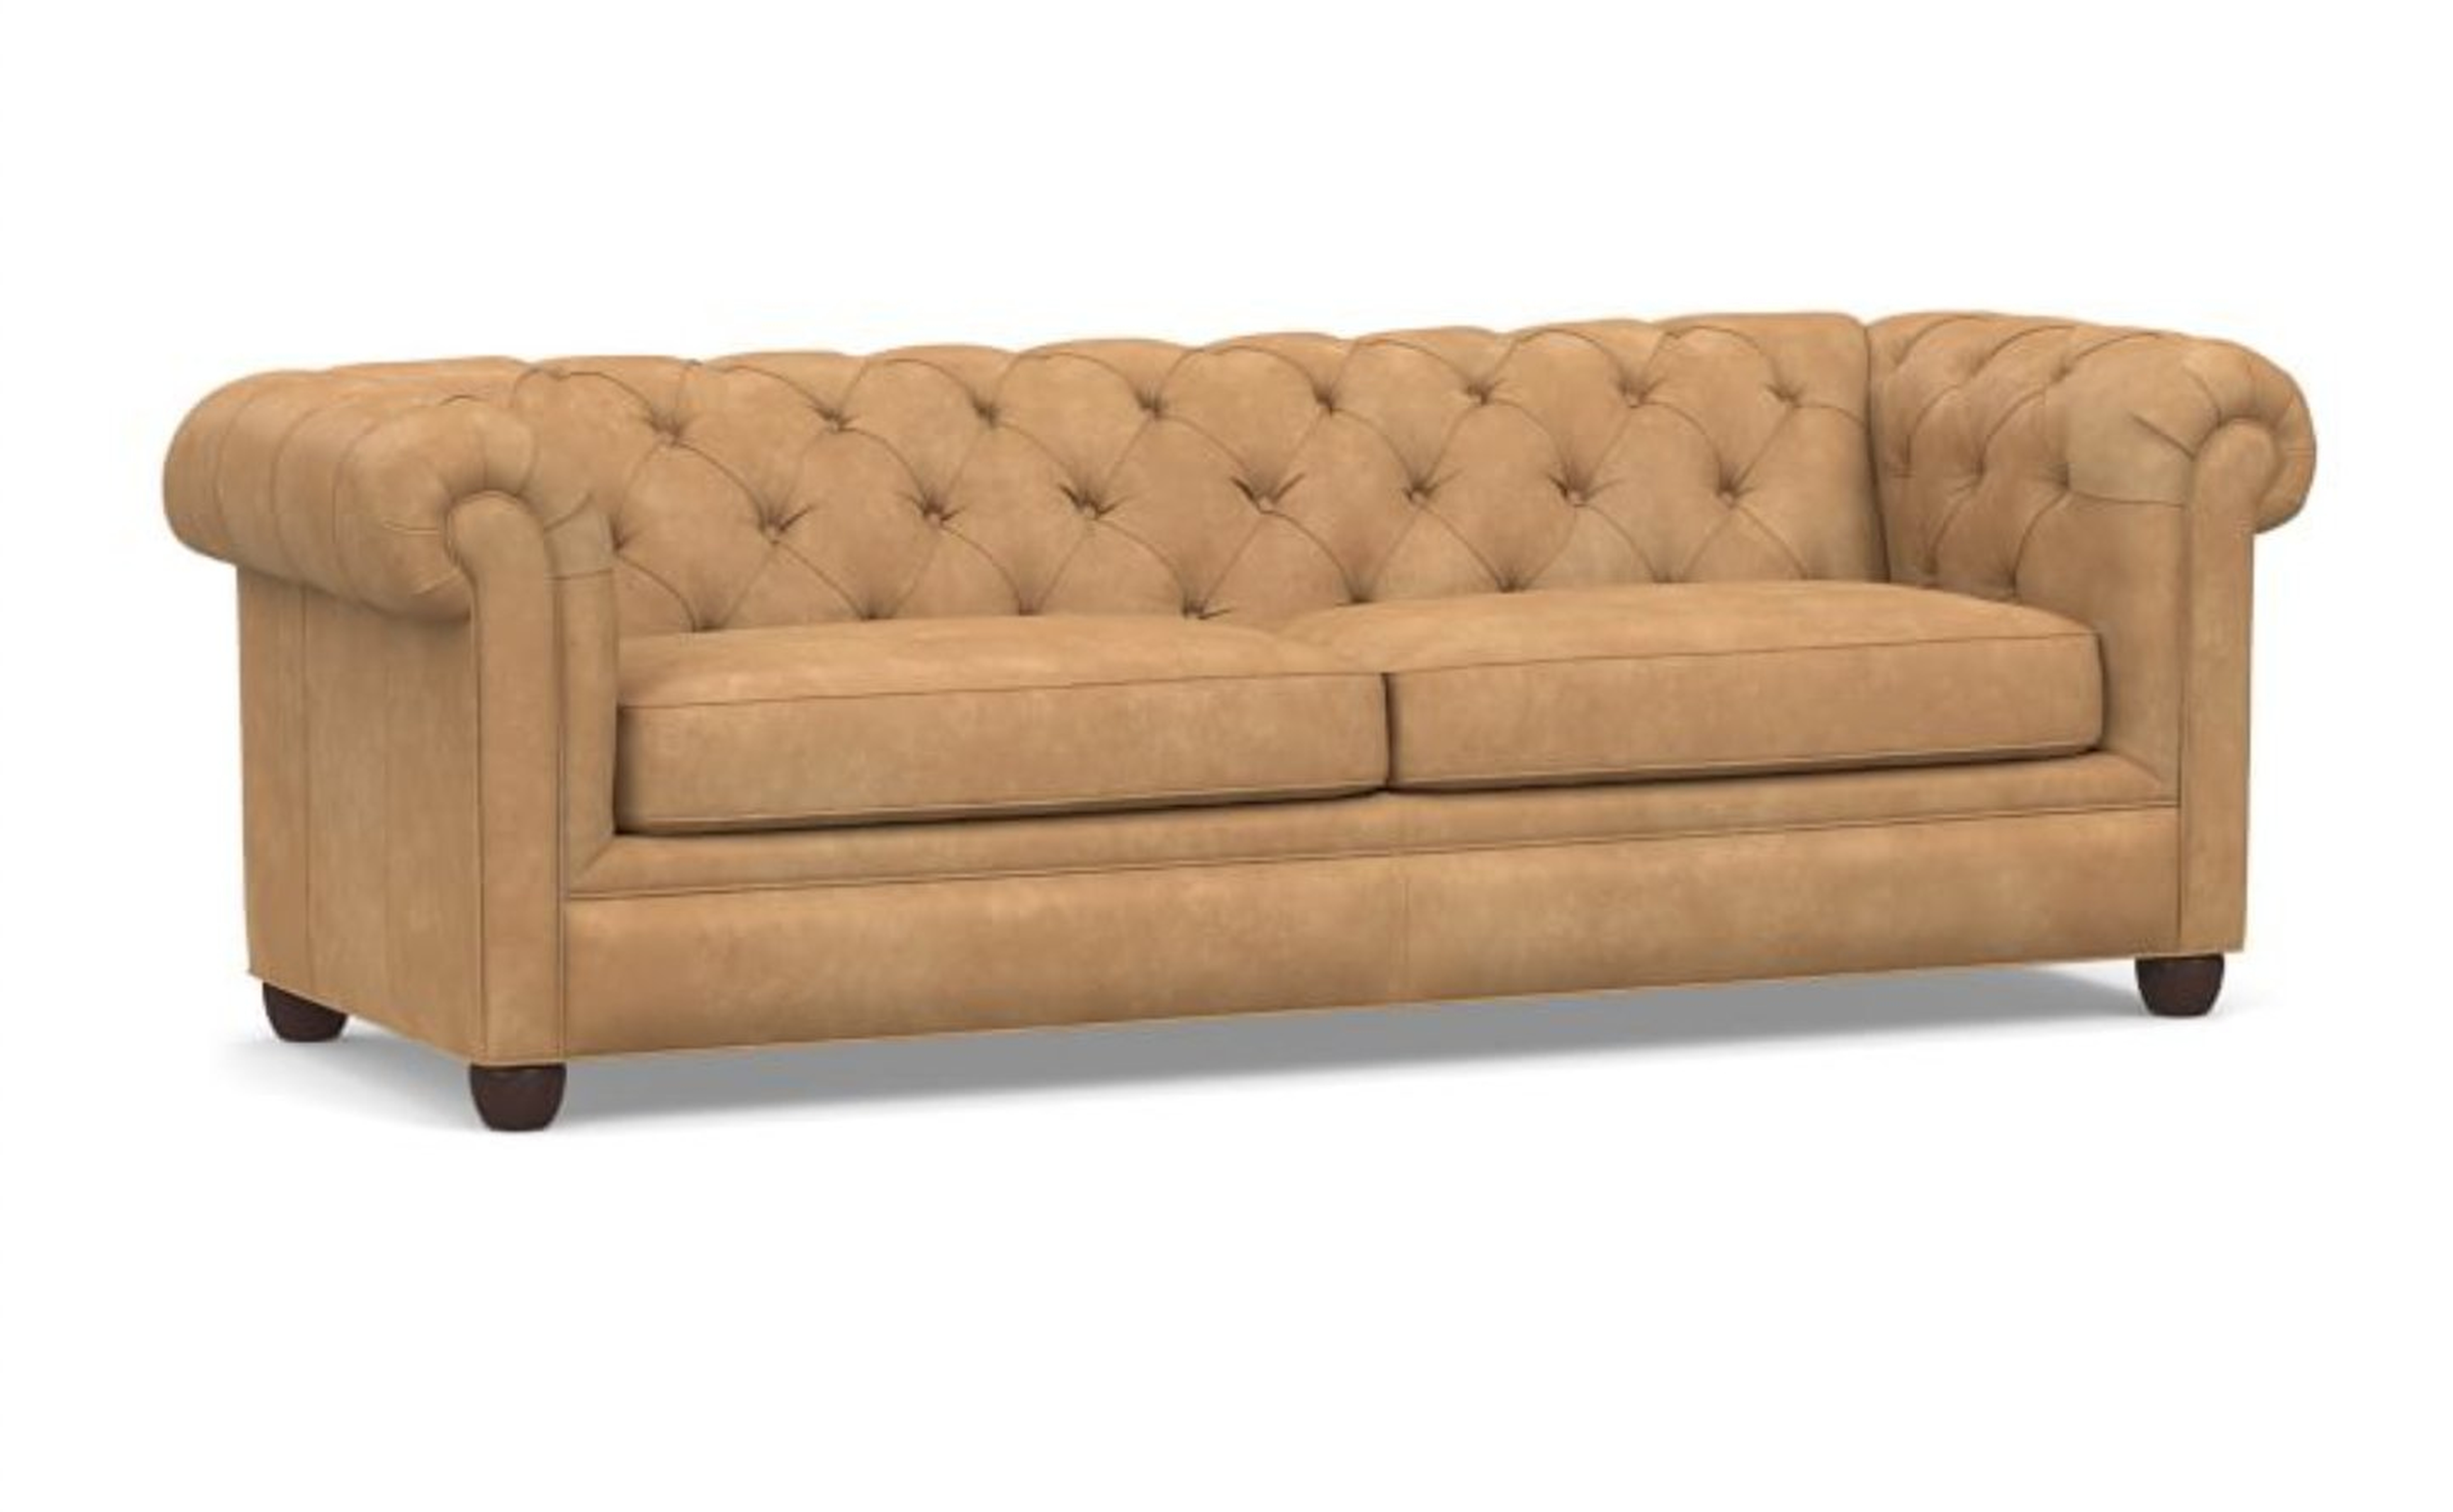 Chesterfield Roll Arm Leather Grand Sofa 96", Polyester Wrapped Cushions, Nubuck Fawn - Pottery Barn